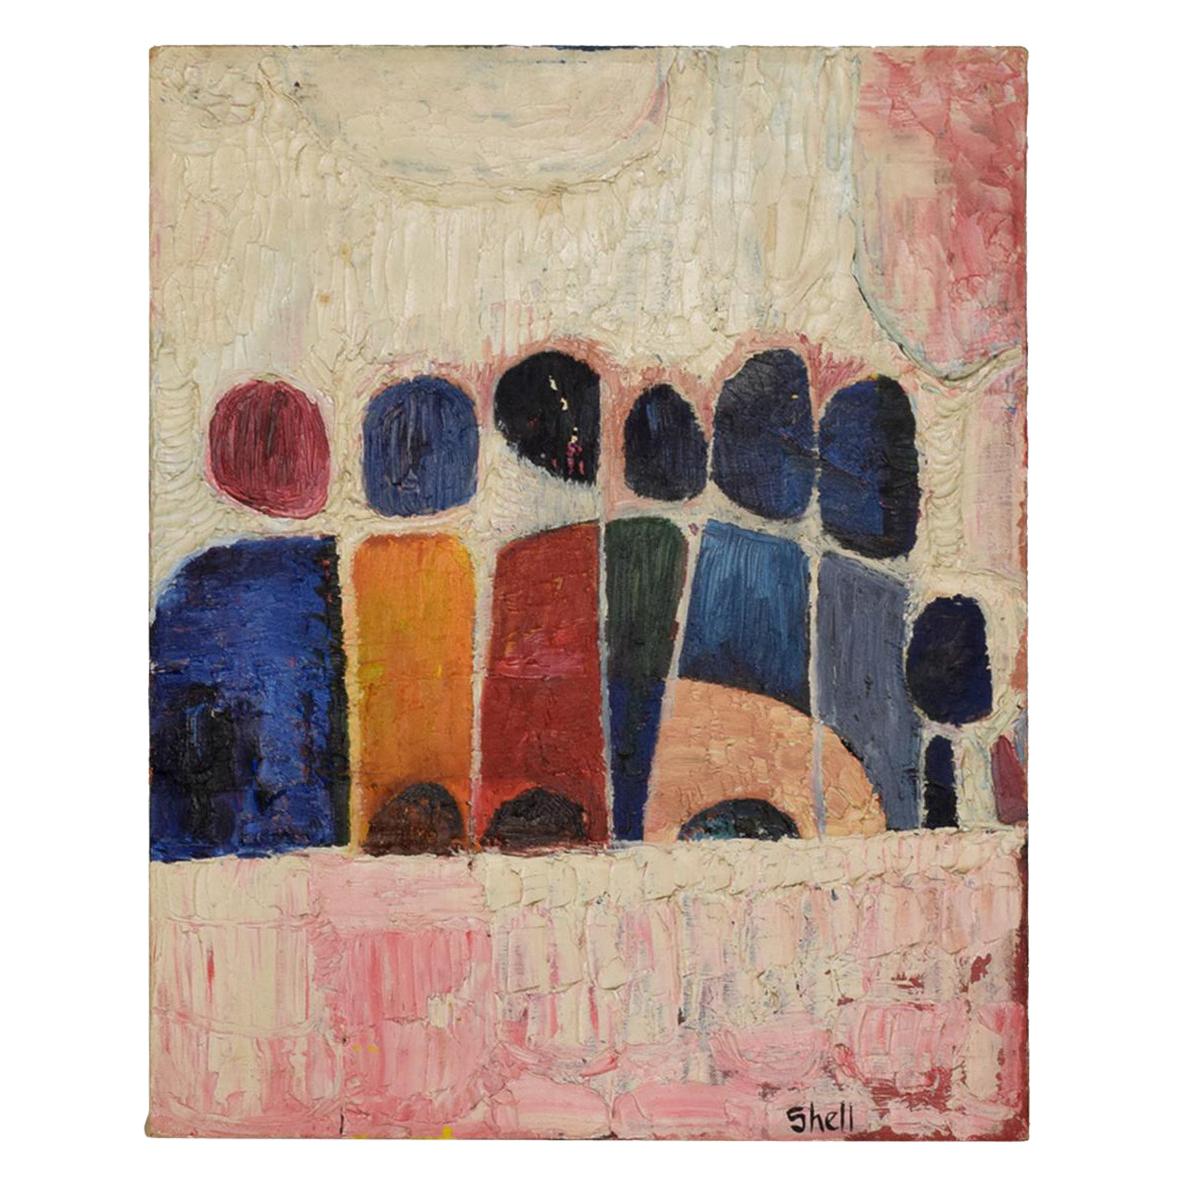 Abstract Painting Signed "Shell", Mid-Century Modern